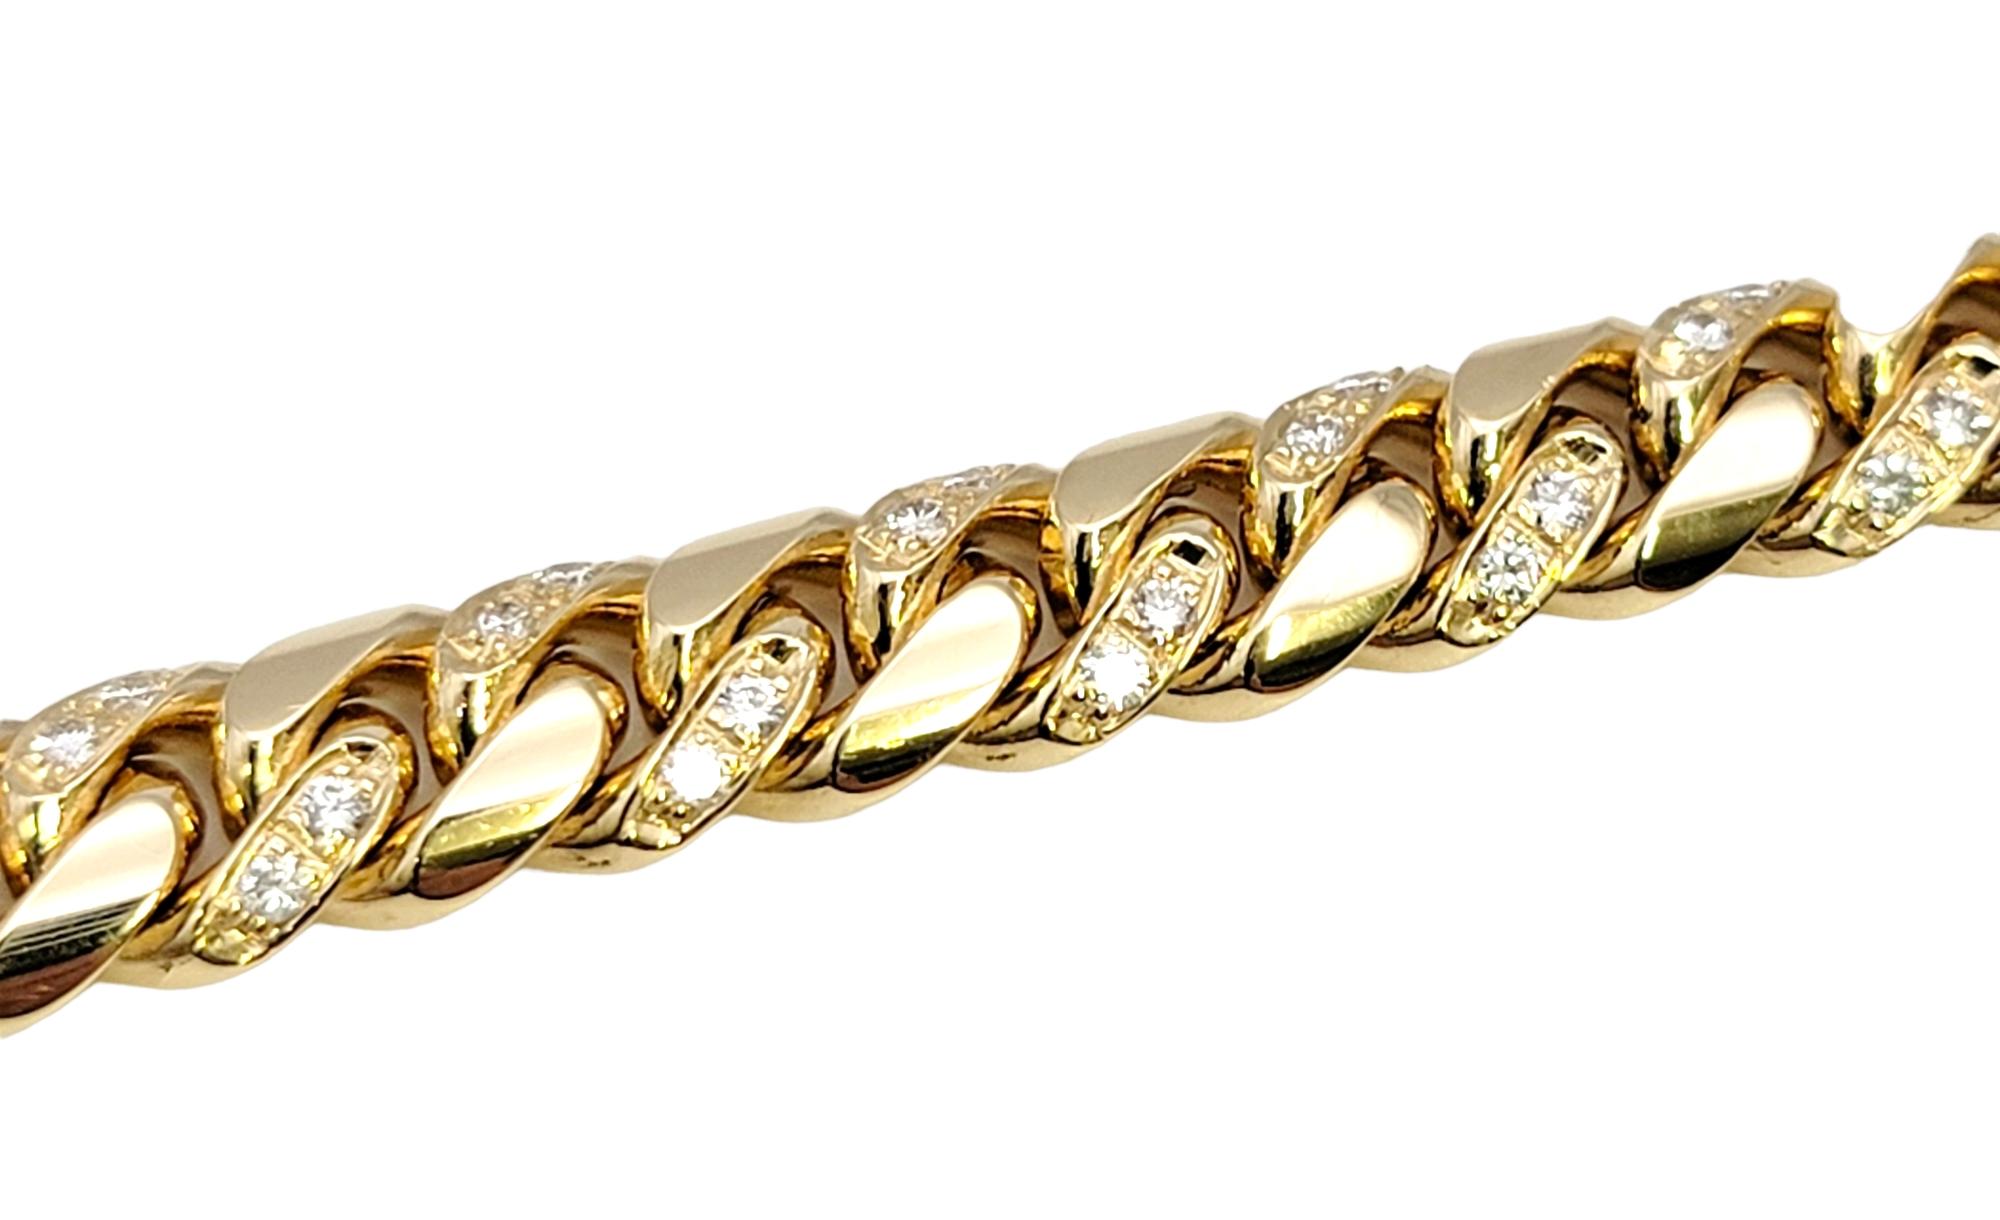 Contemporary Unisex 14 Karat Yellow Gold Curb Link Bracelet with Pave Diamond Accents For Sale